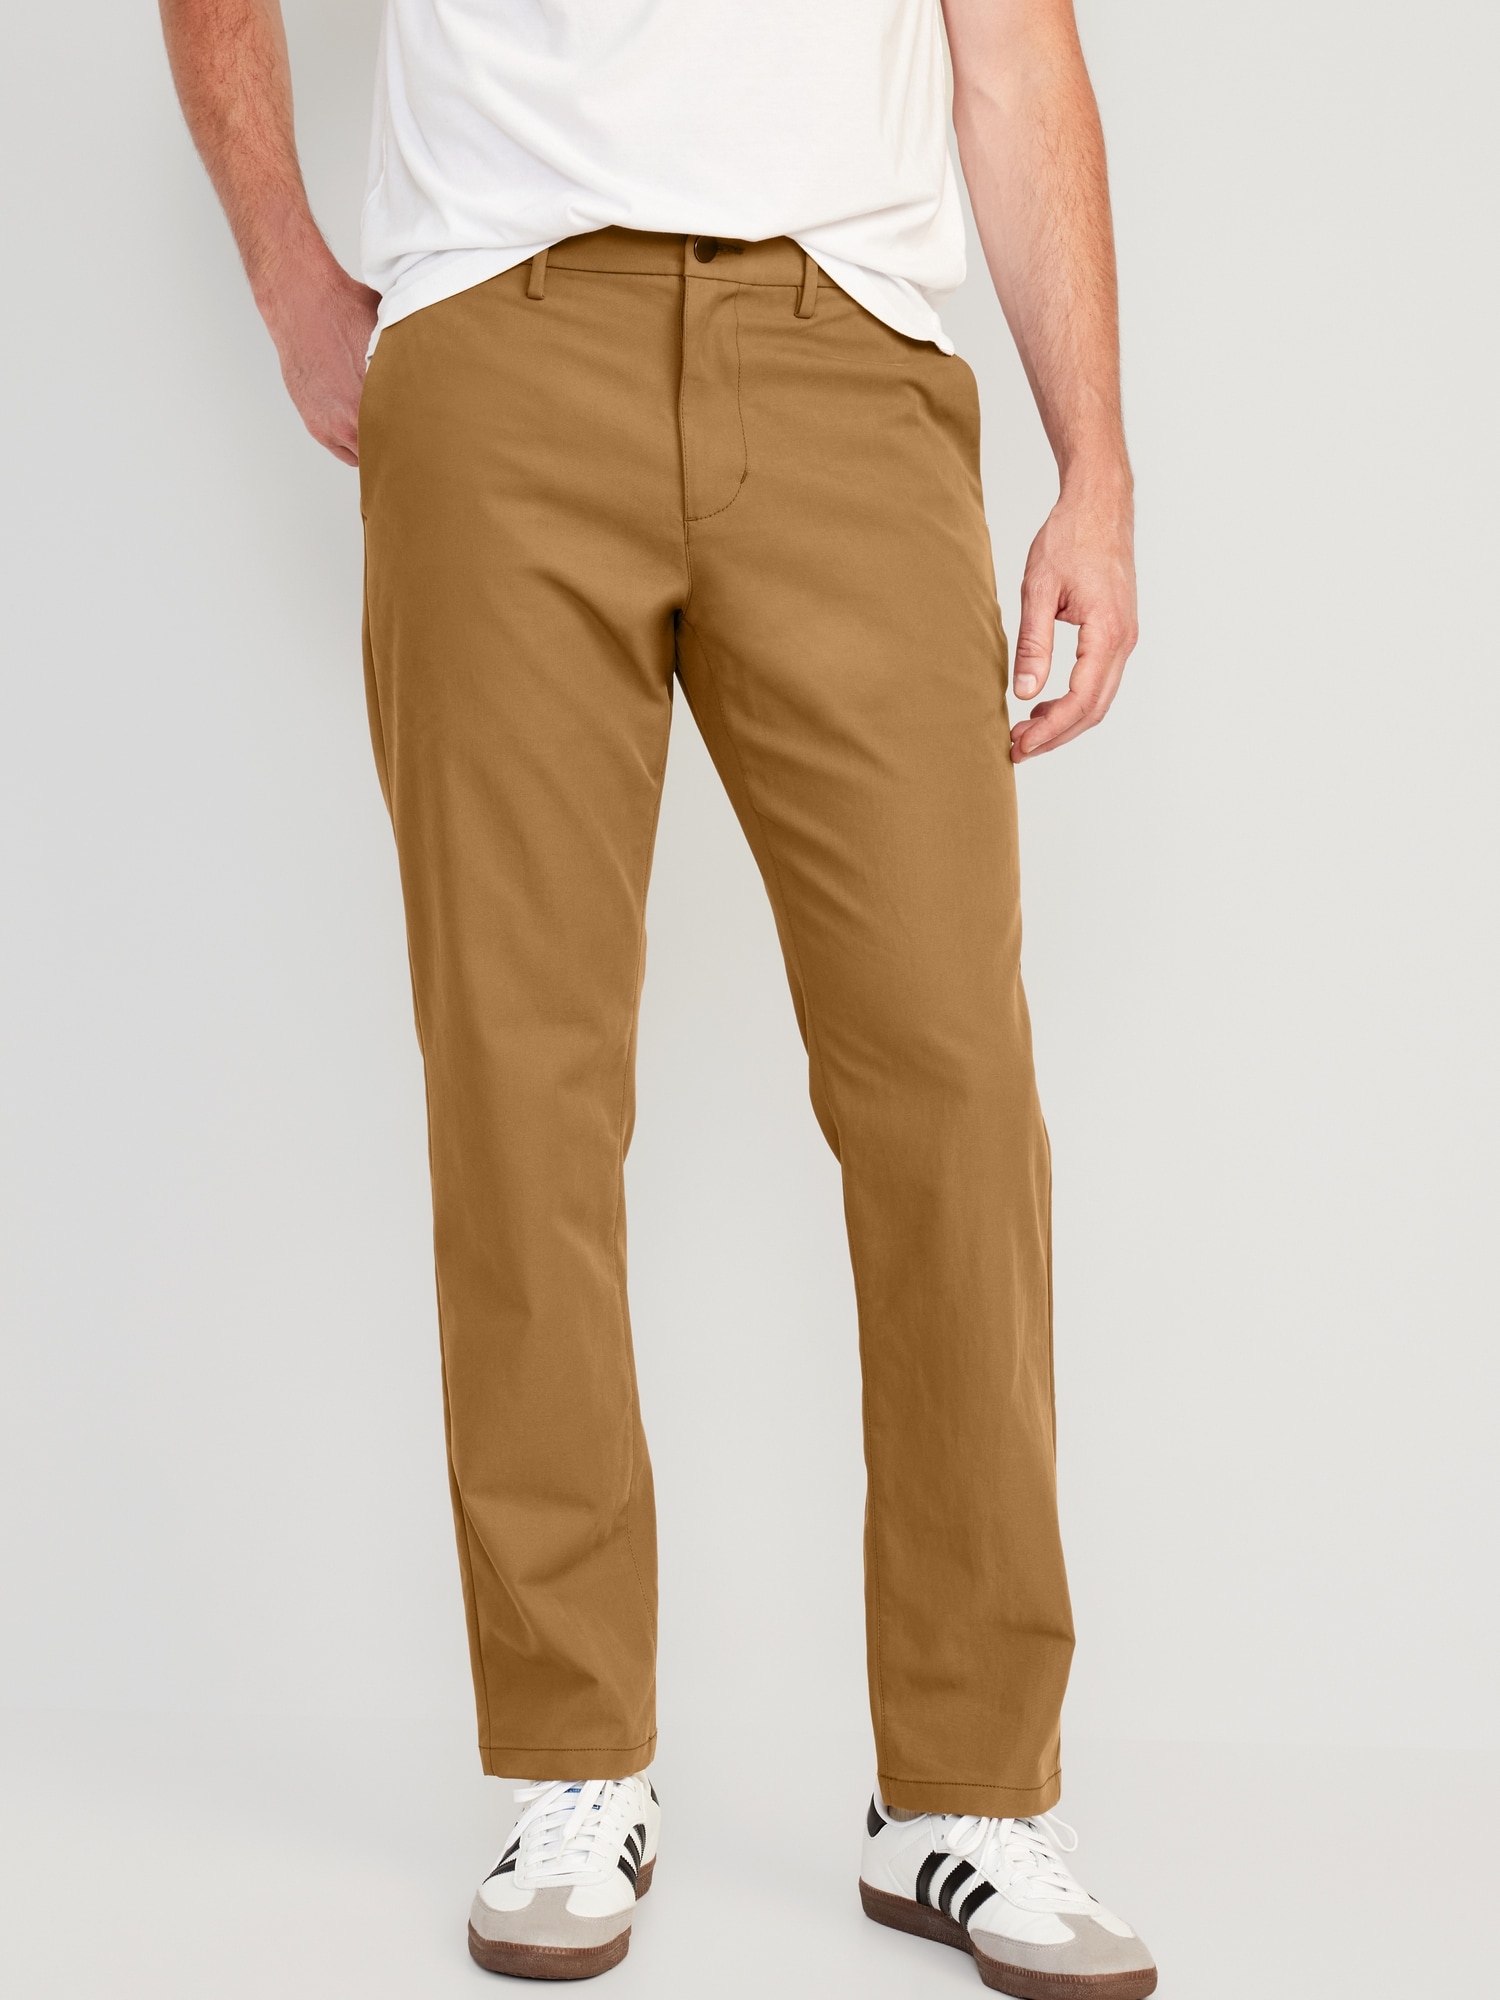 Pin by Arzu Vargas on Fall Outfits 2019  Mens pants Mens khakis Men in  uniform